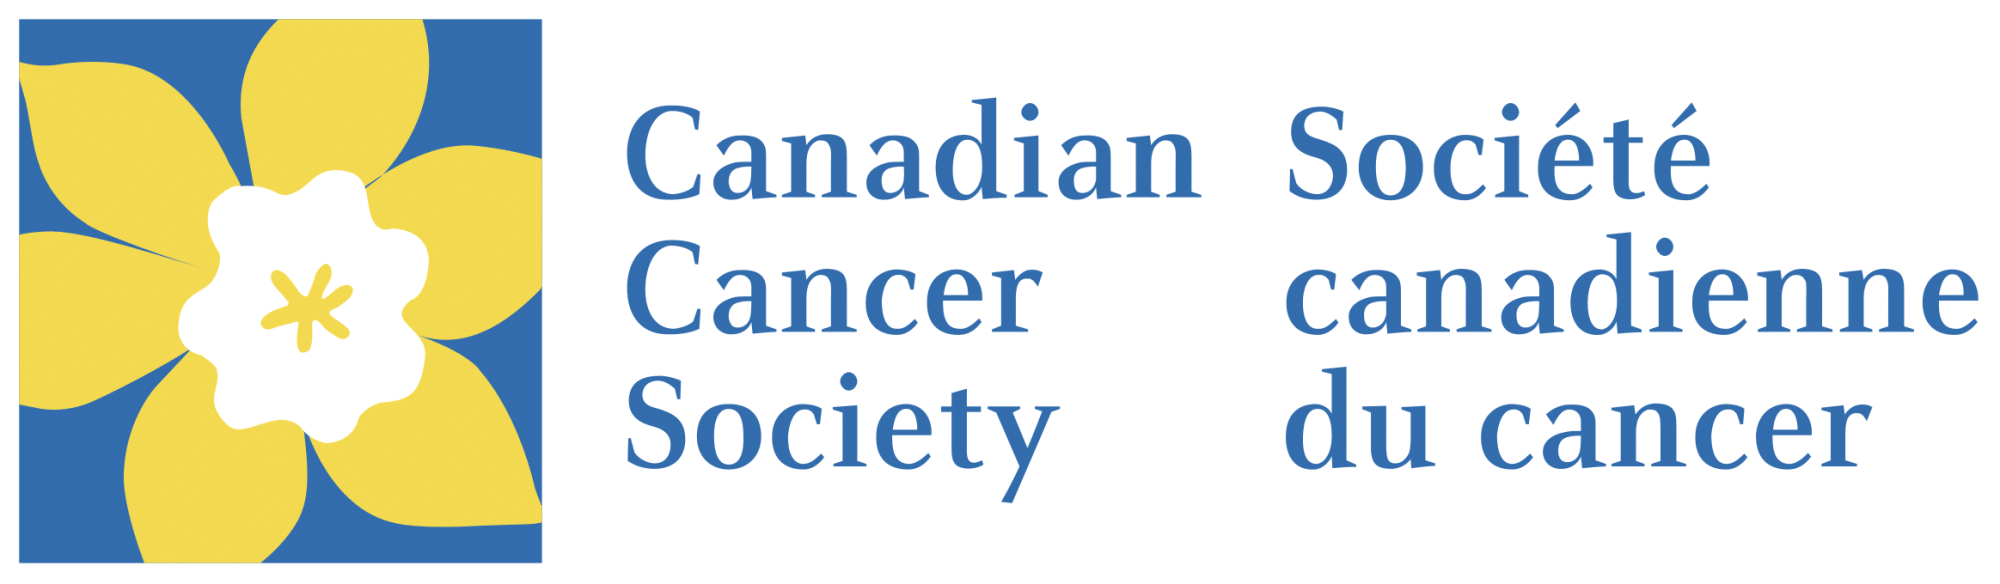 canadian cancer society.png